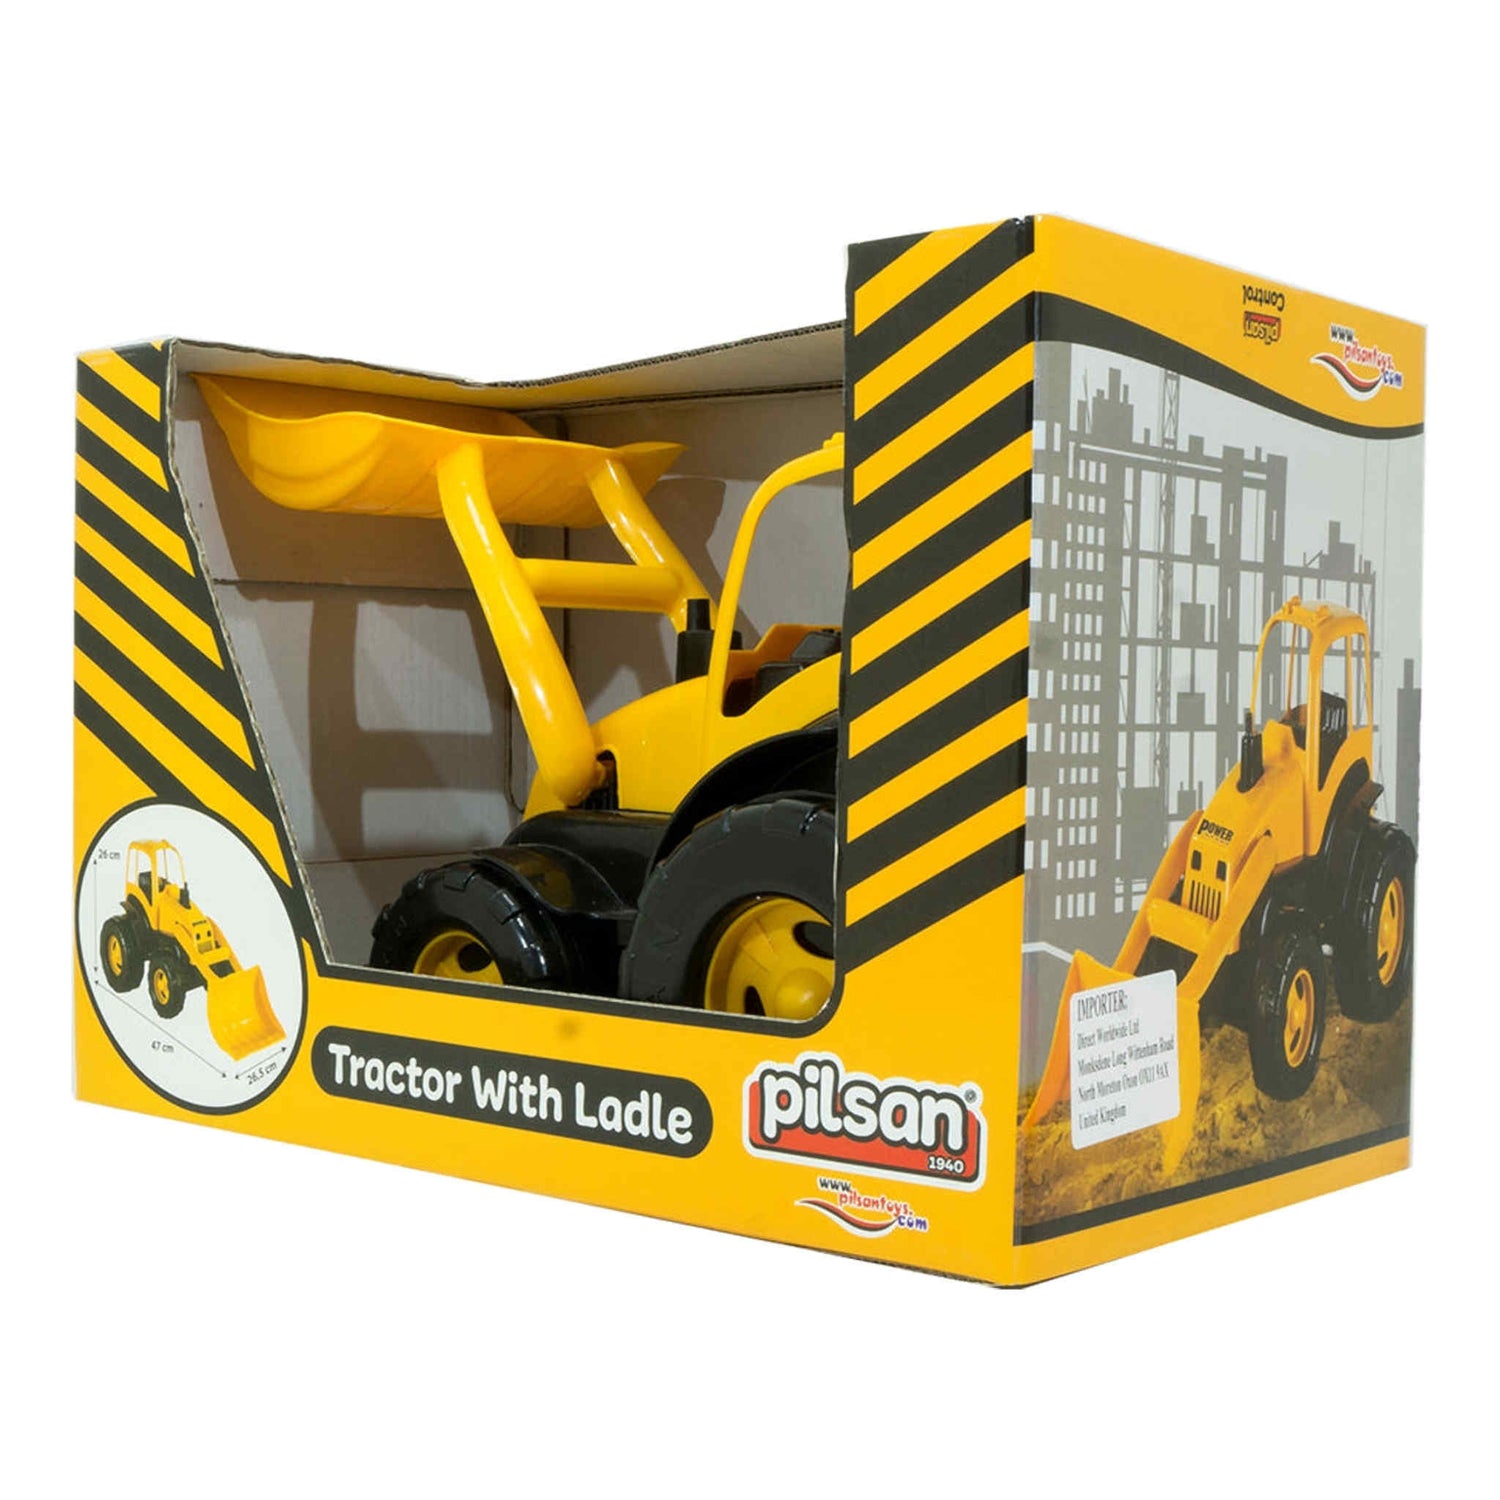 Pilsan Tractor with Loader